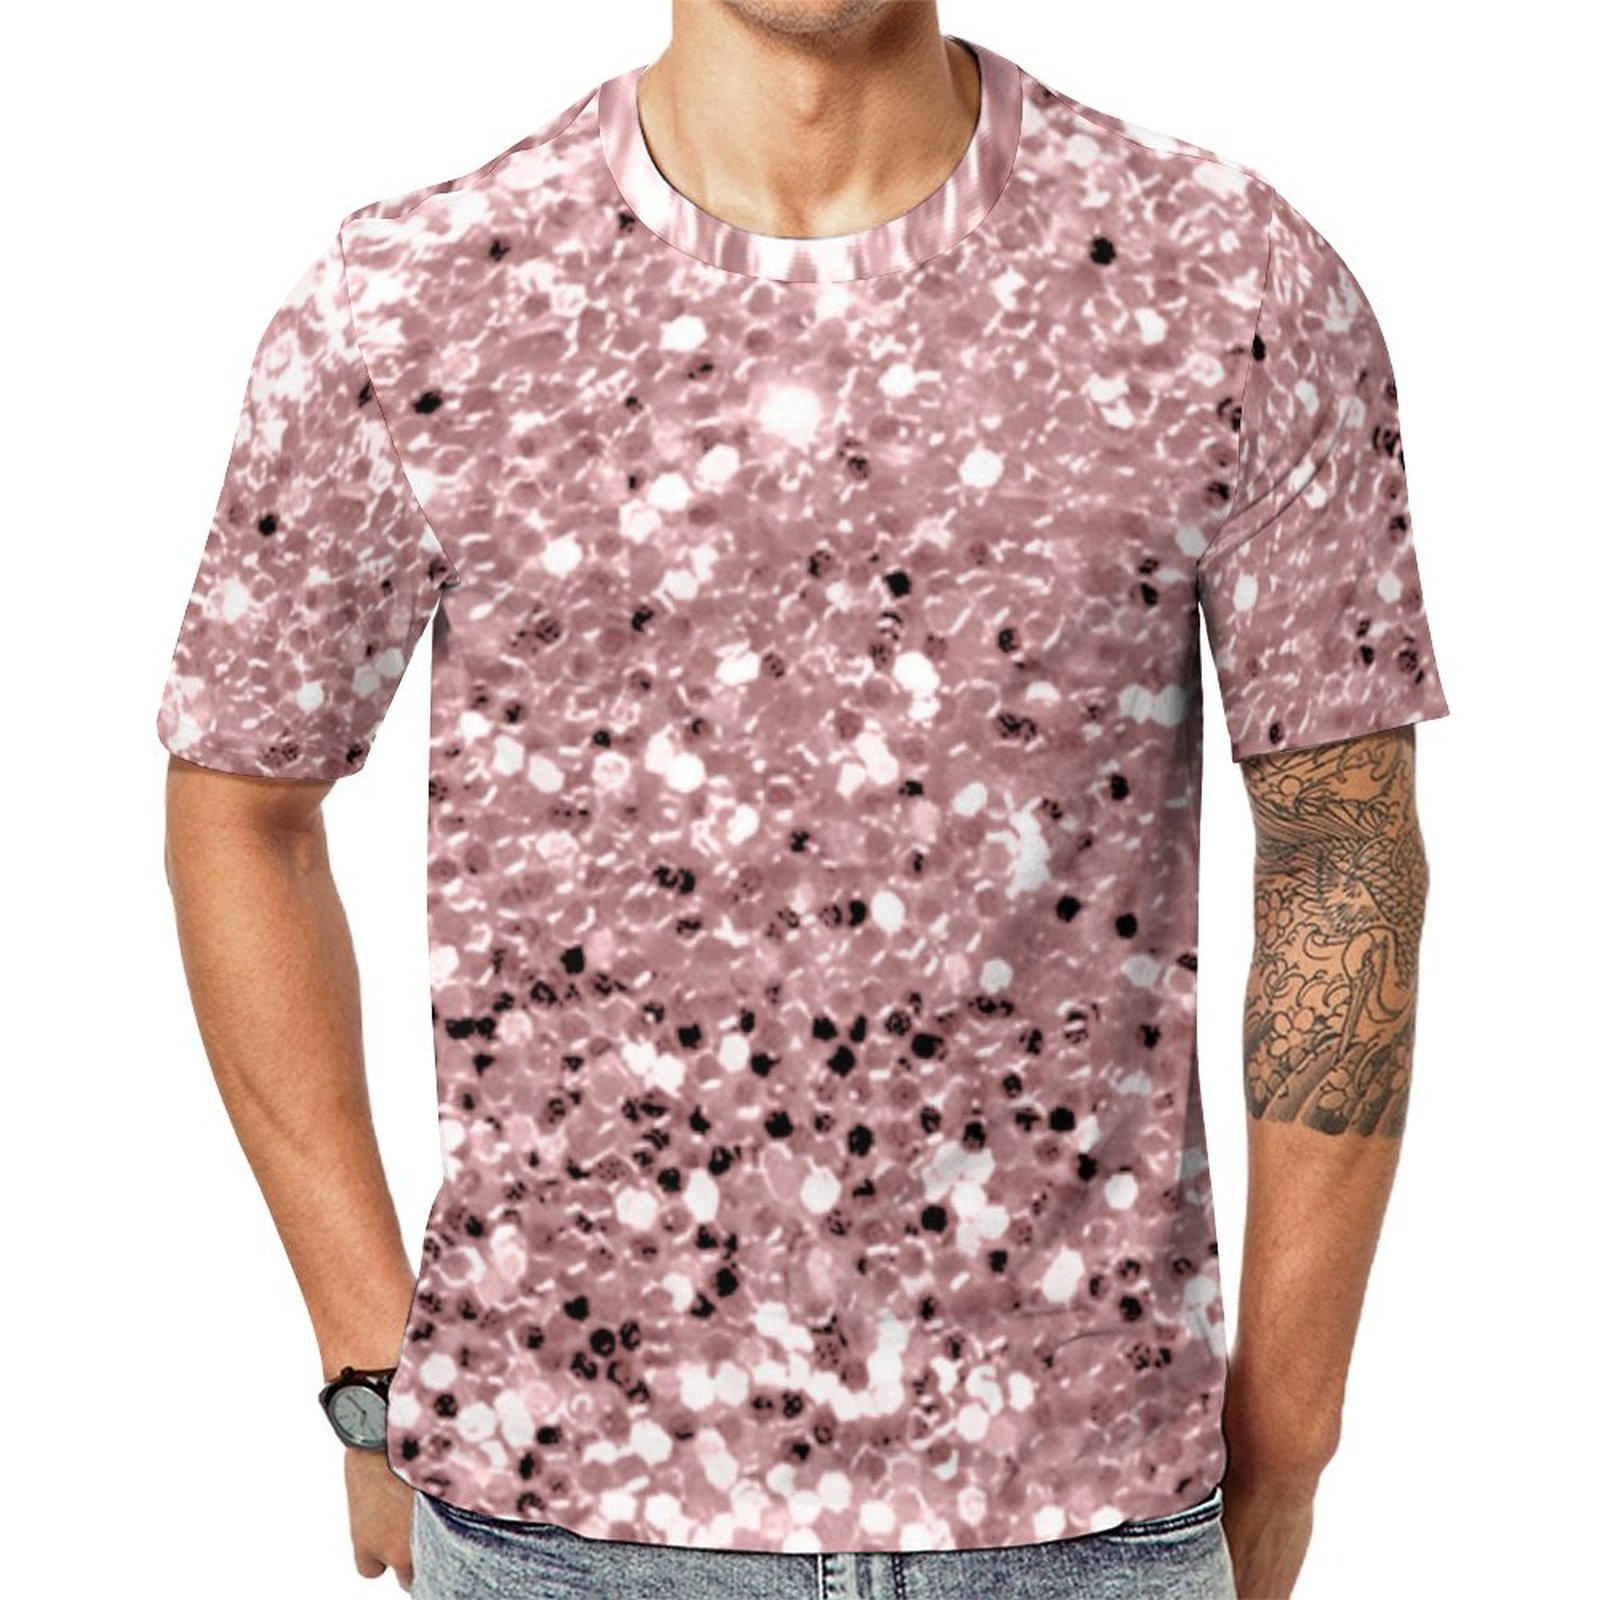 Glitter Stylist Fashion Sequin Blush Pink Rose Short Sleeve Print Unisex Tshirt Summer Casual Tees for Men and Women Coolcoshirts